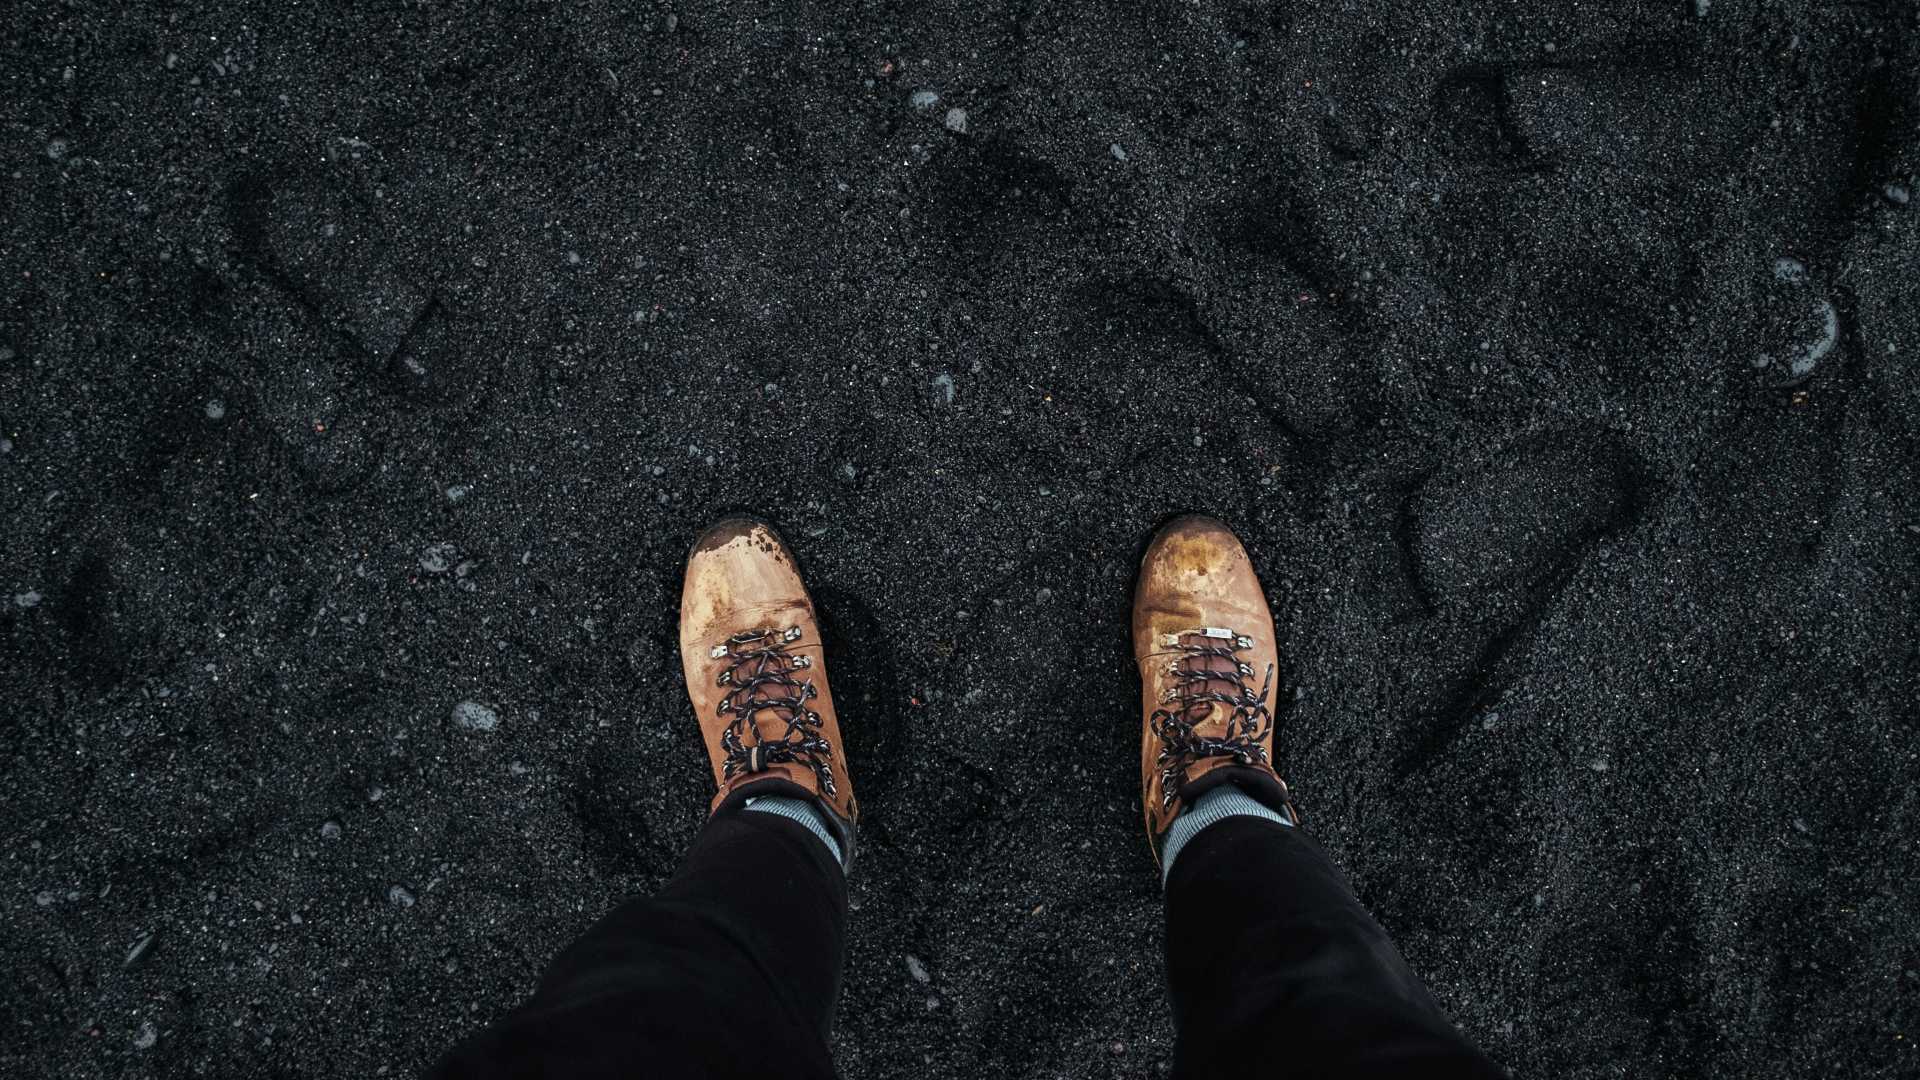 Hiking boots on a black sand beach in Iceland